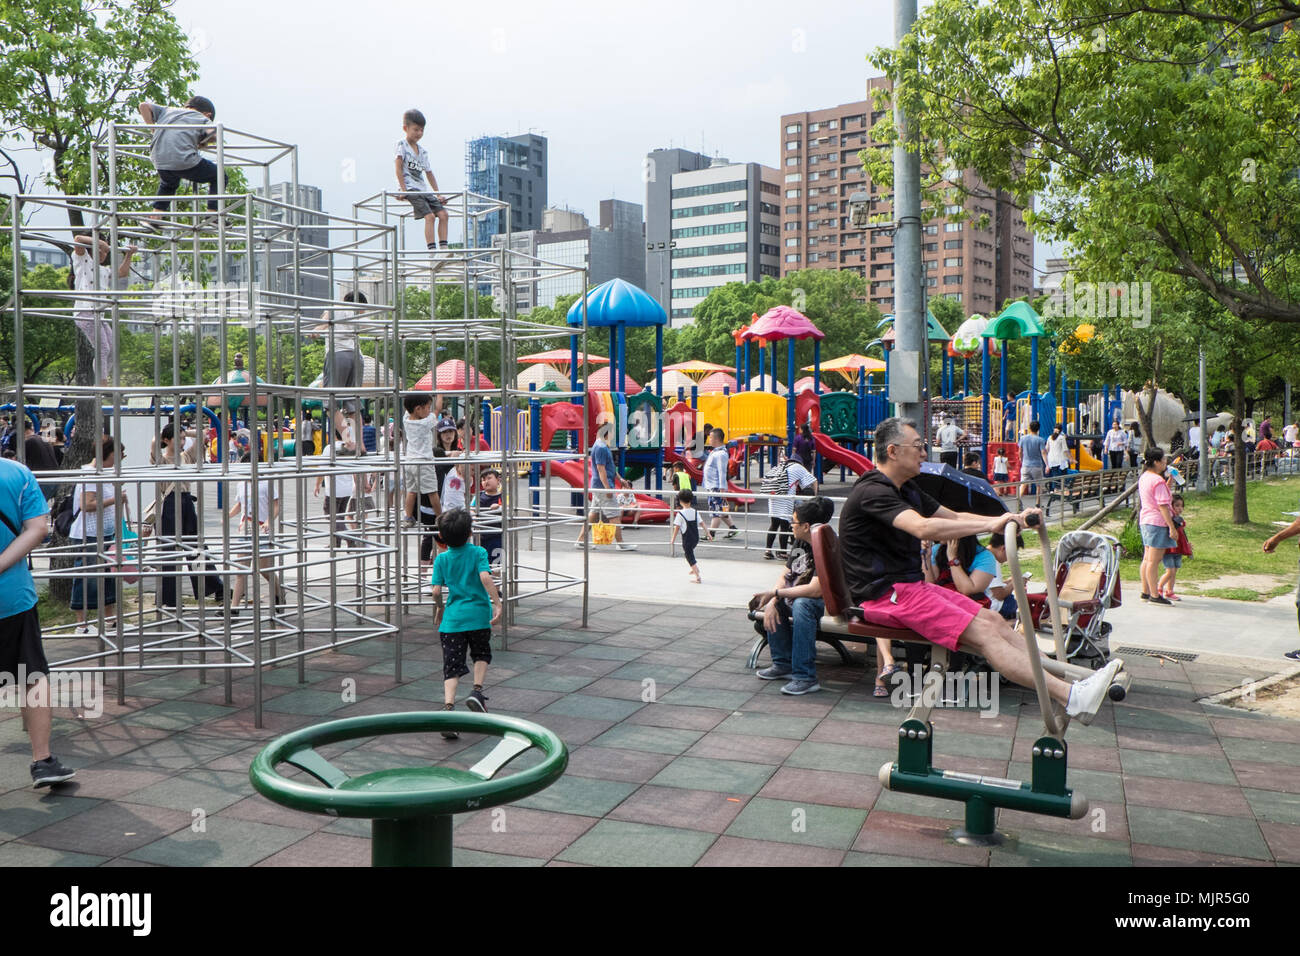 Taiwan, weather,: Hottest, day, of, the, year.Summer, has, arrived, in,  the, capital, Taipei, where, folks, young, and, old, gathered, at,  centrally, located, Daan Park. Temperatures, reached, 34 degrees. Credit:  Paul Quayle/Alamy Live